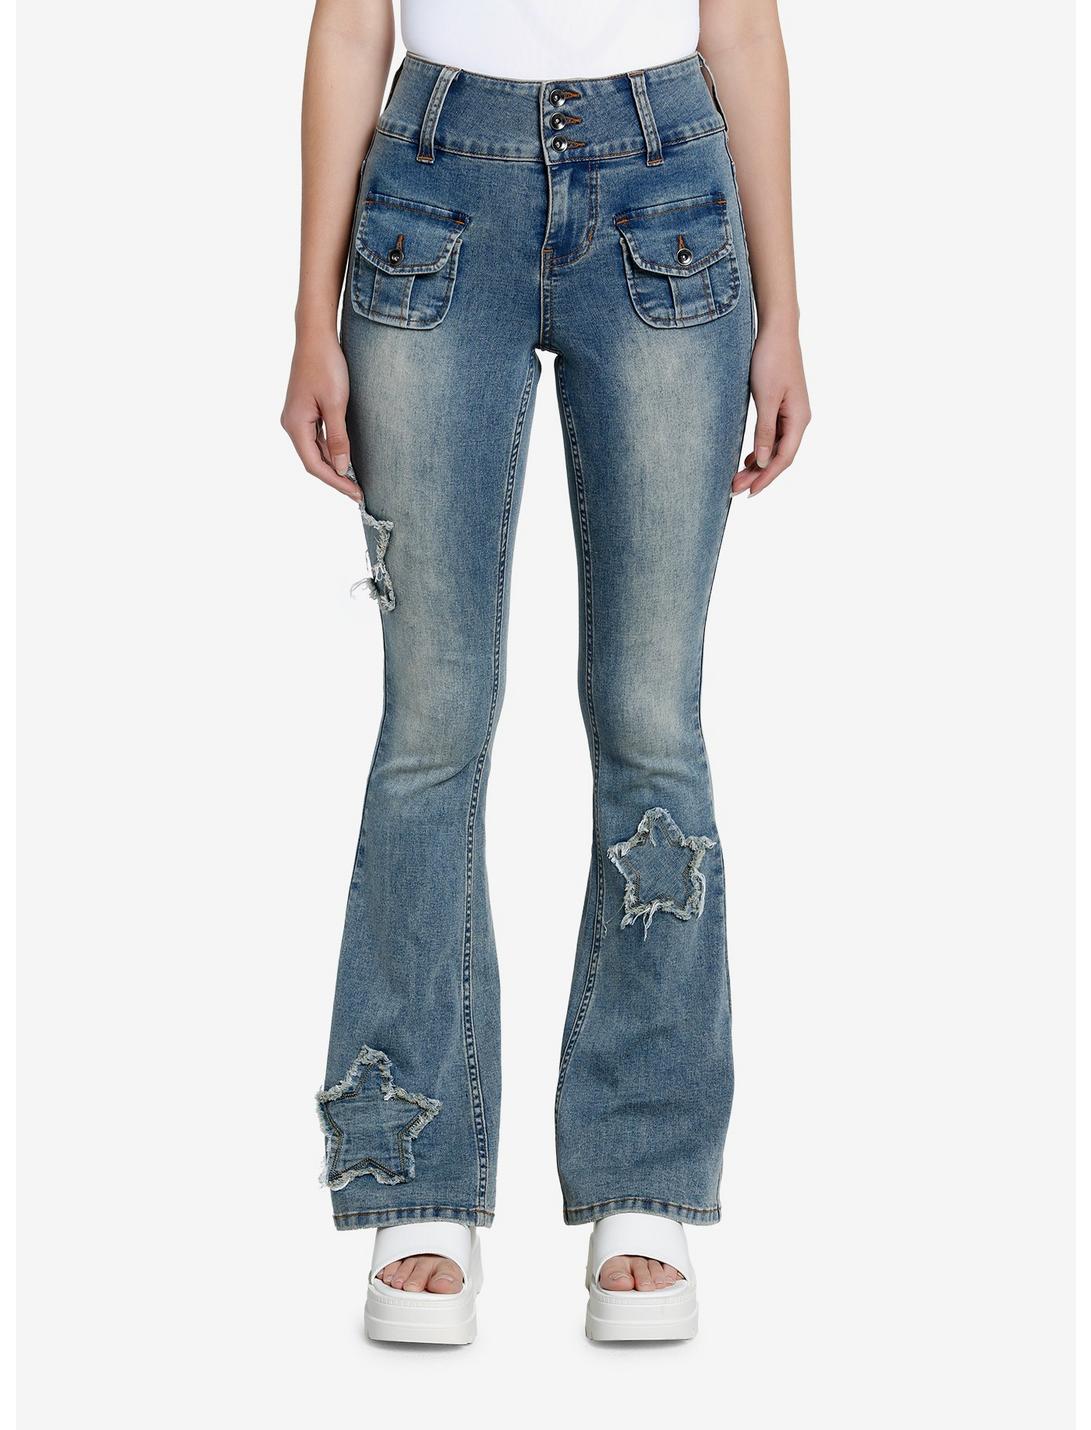 Sweet Society Star Low-Rise Flare Jeans, INDIGO, hi-res